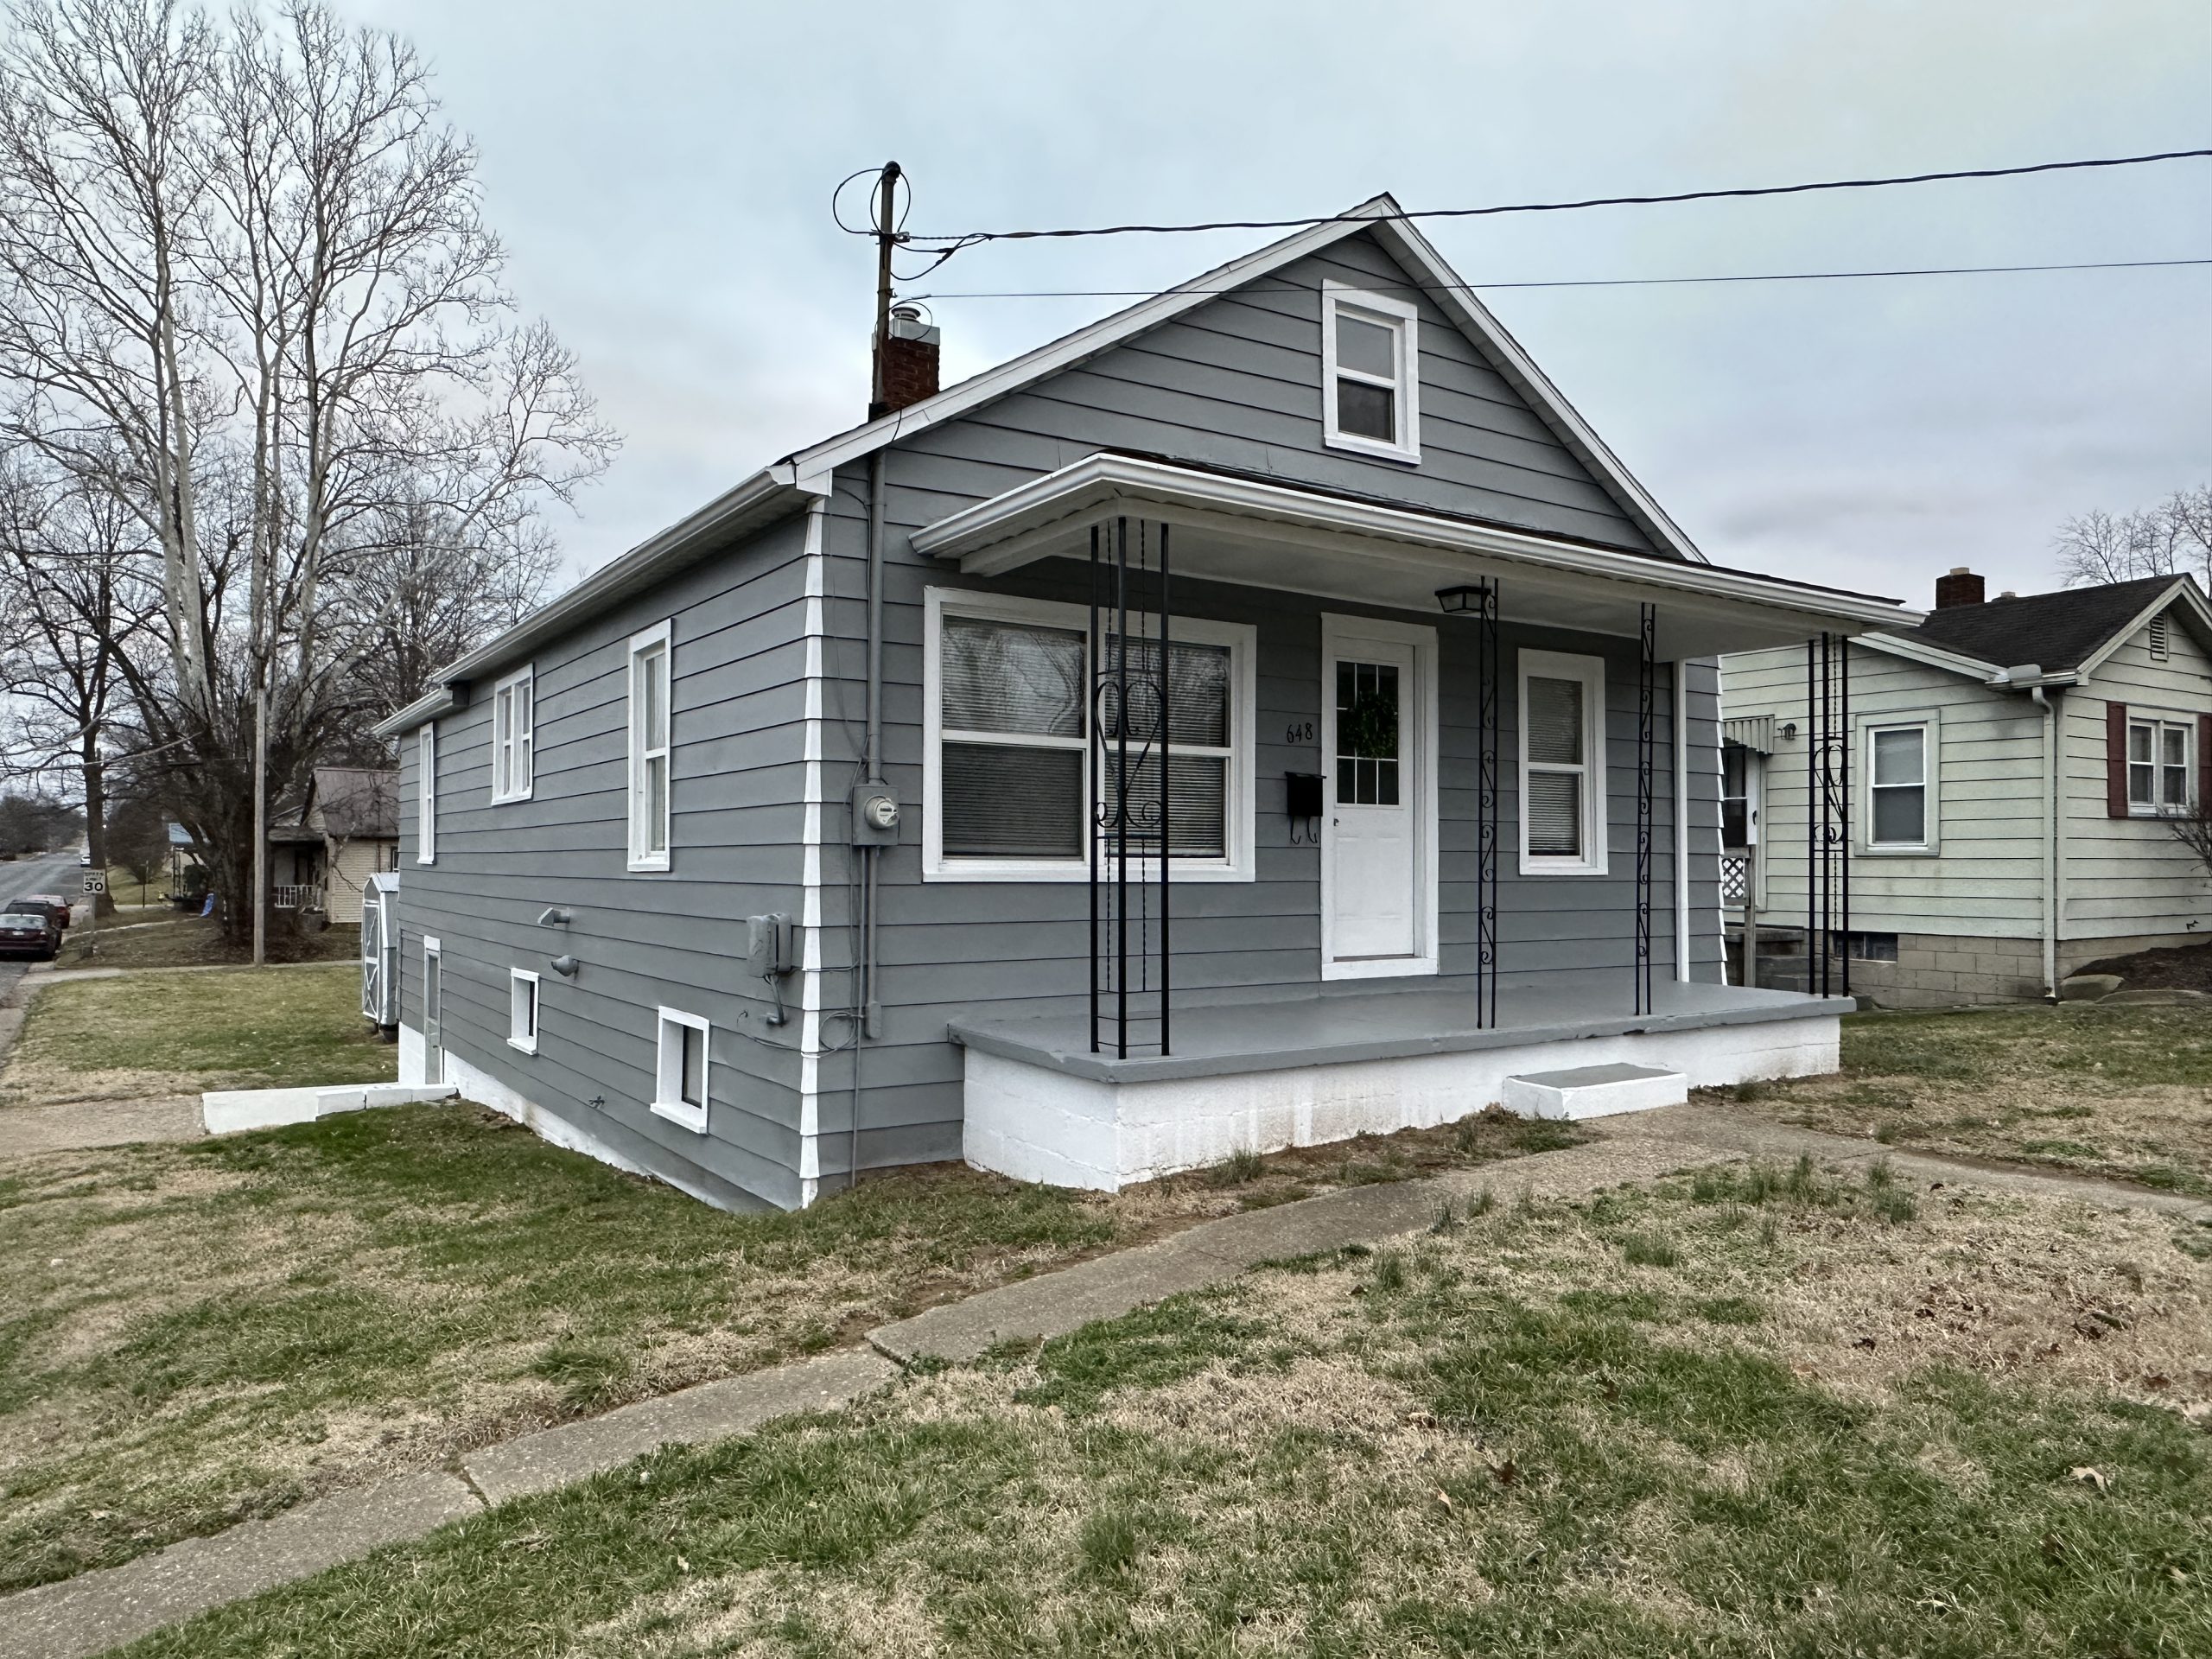 Recently Remodeled 3 Bed/1 Bath with Full Basement on Corner Lot